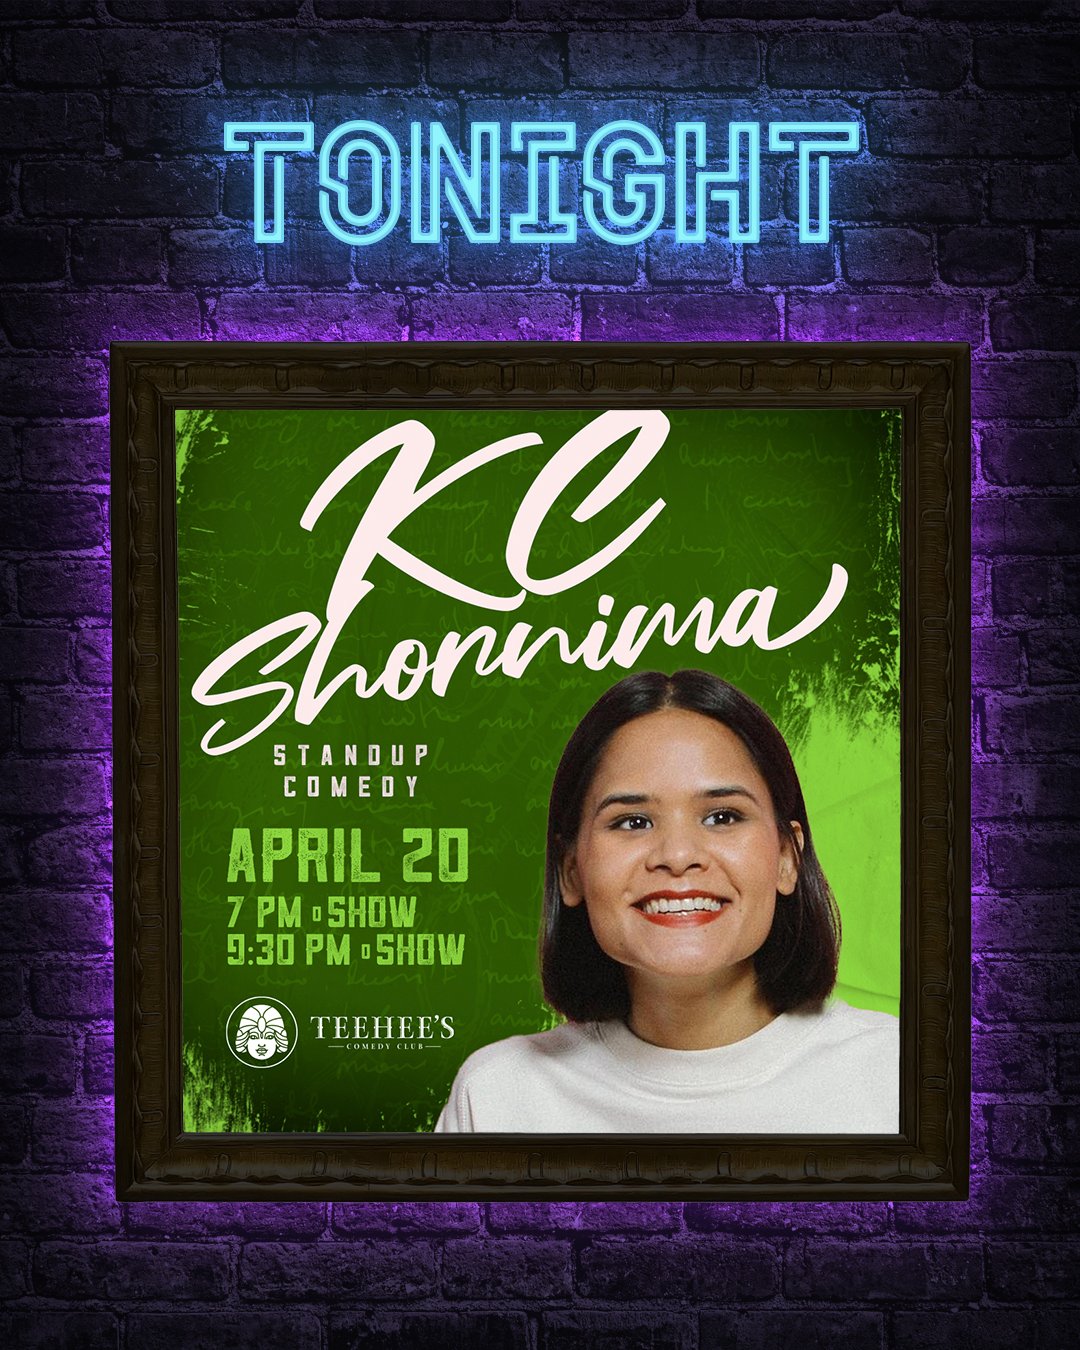 🔥🎤🔥 Tonight! Hilarious comic and SNL Weekend Update writer, KC Shornima takes our stage for 2 shows!
Get 🎟🎟🎟 at teeheescomedy.com/shows